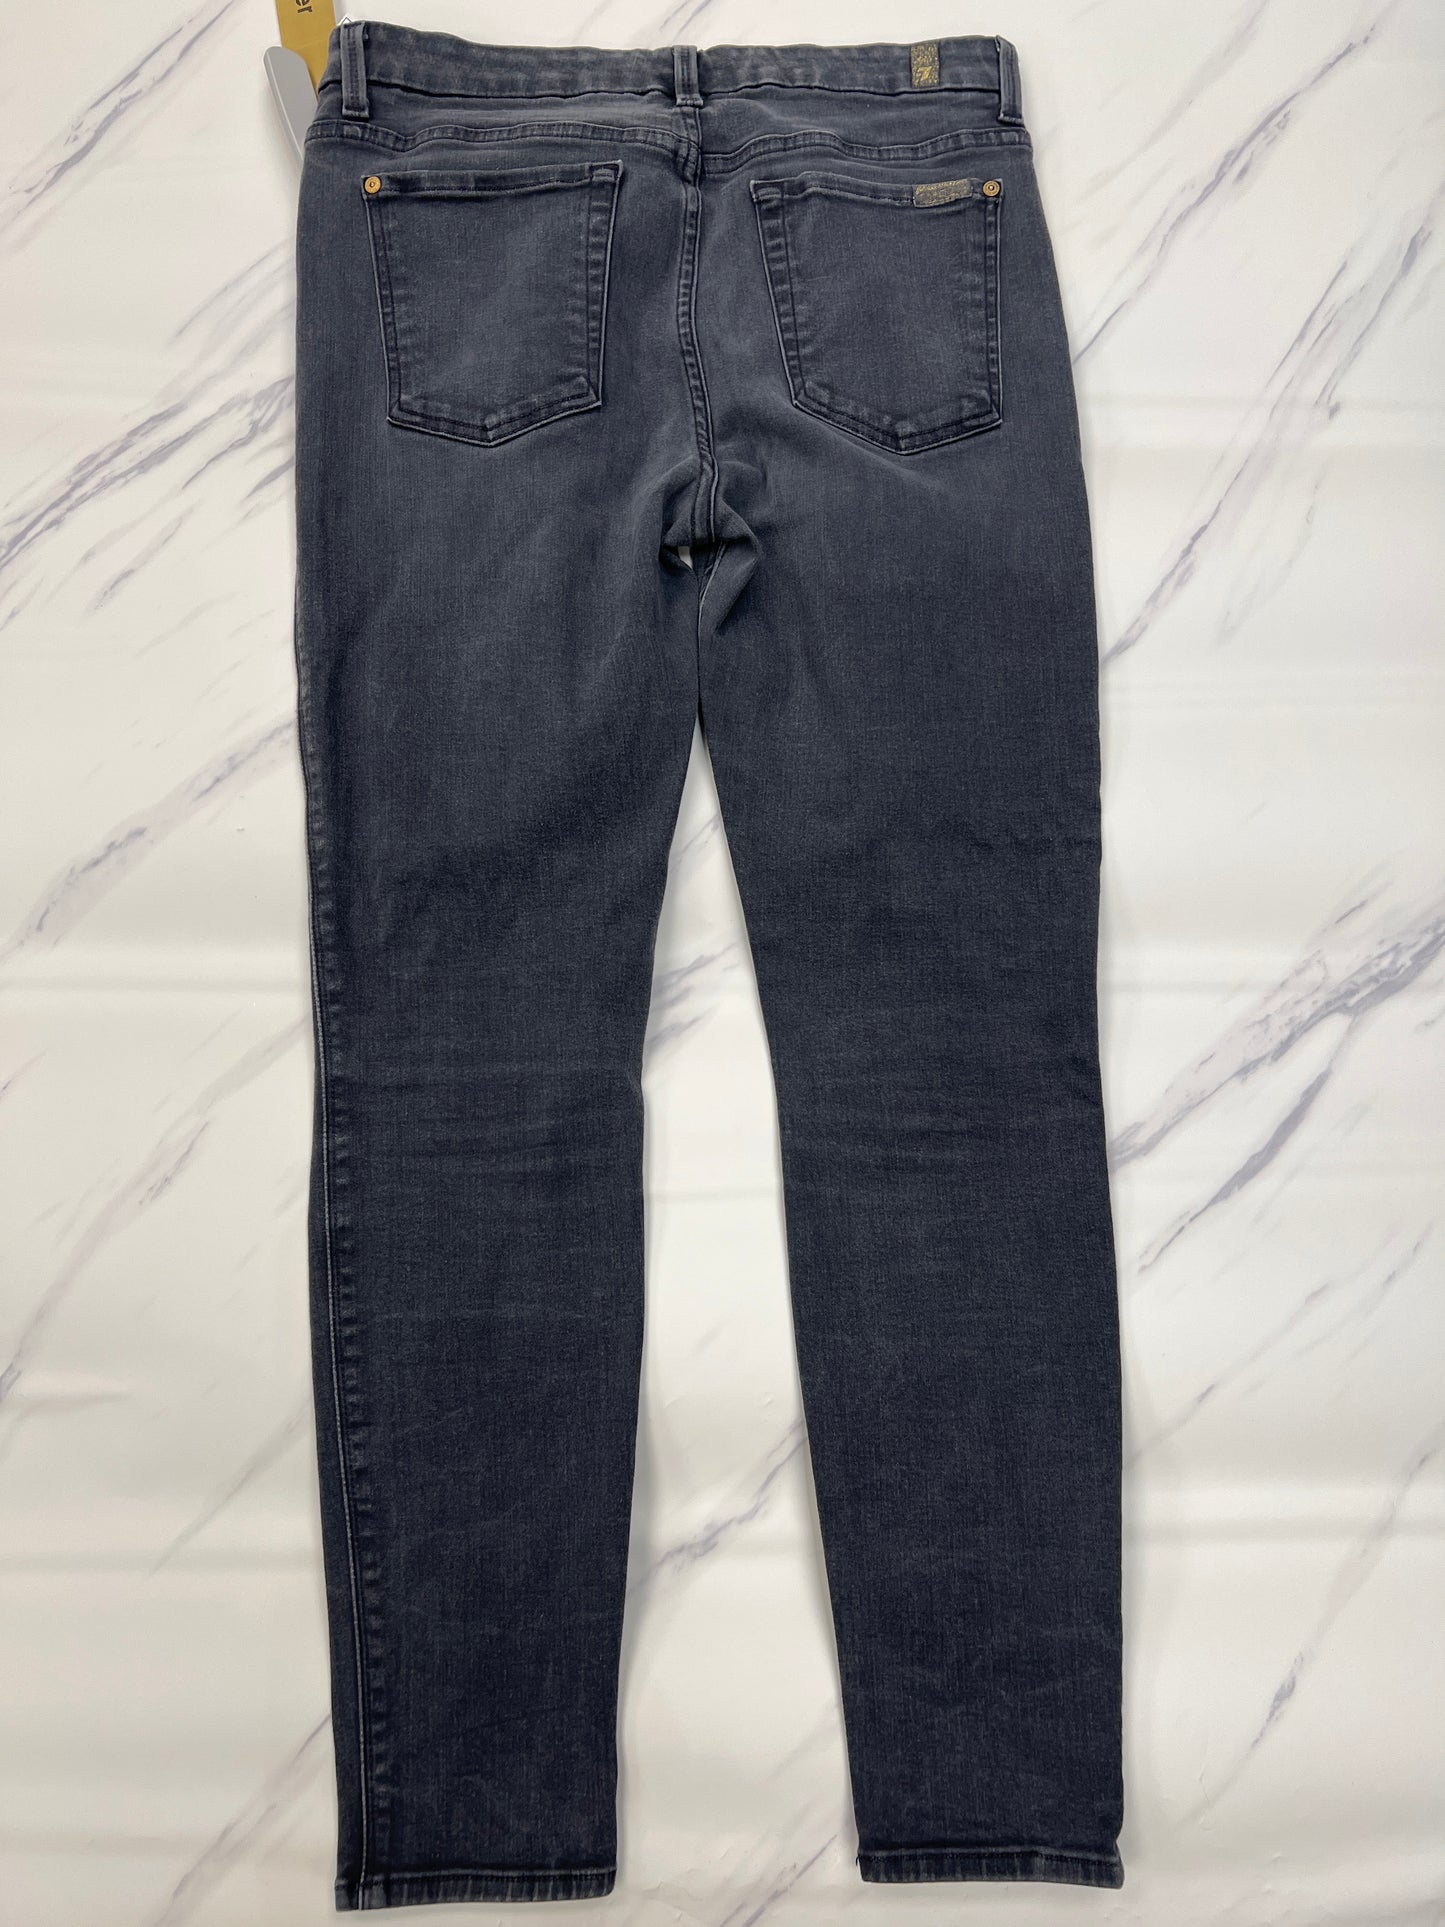 Jeans Skinny By 7 For All Mankind  Size: 12